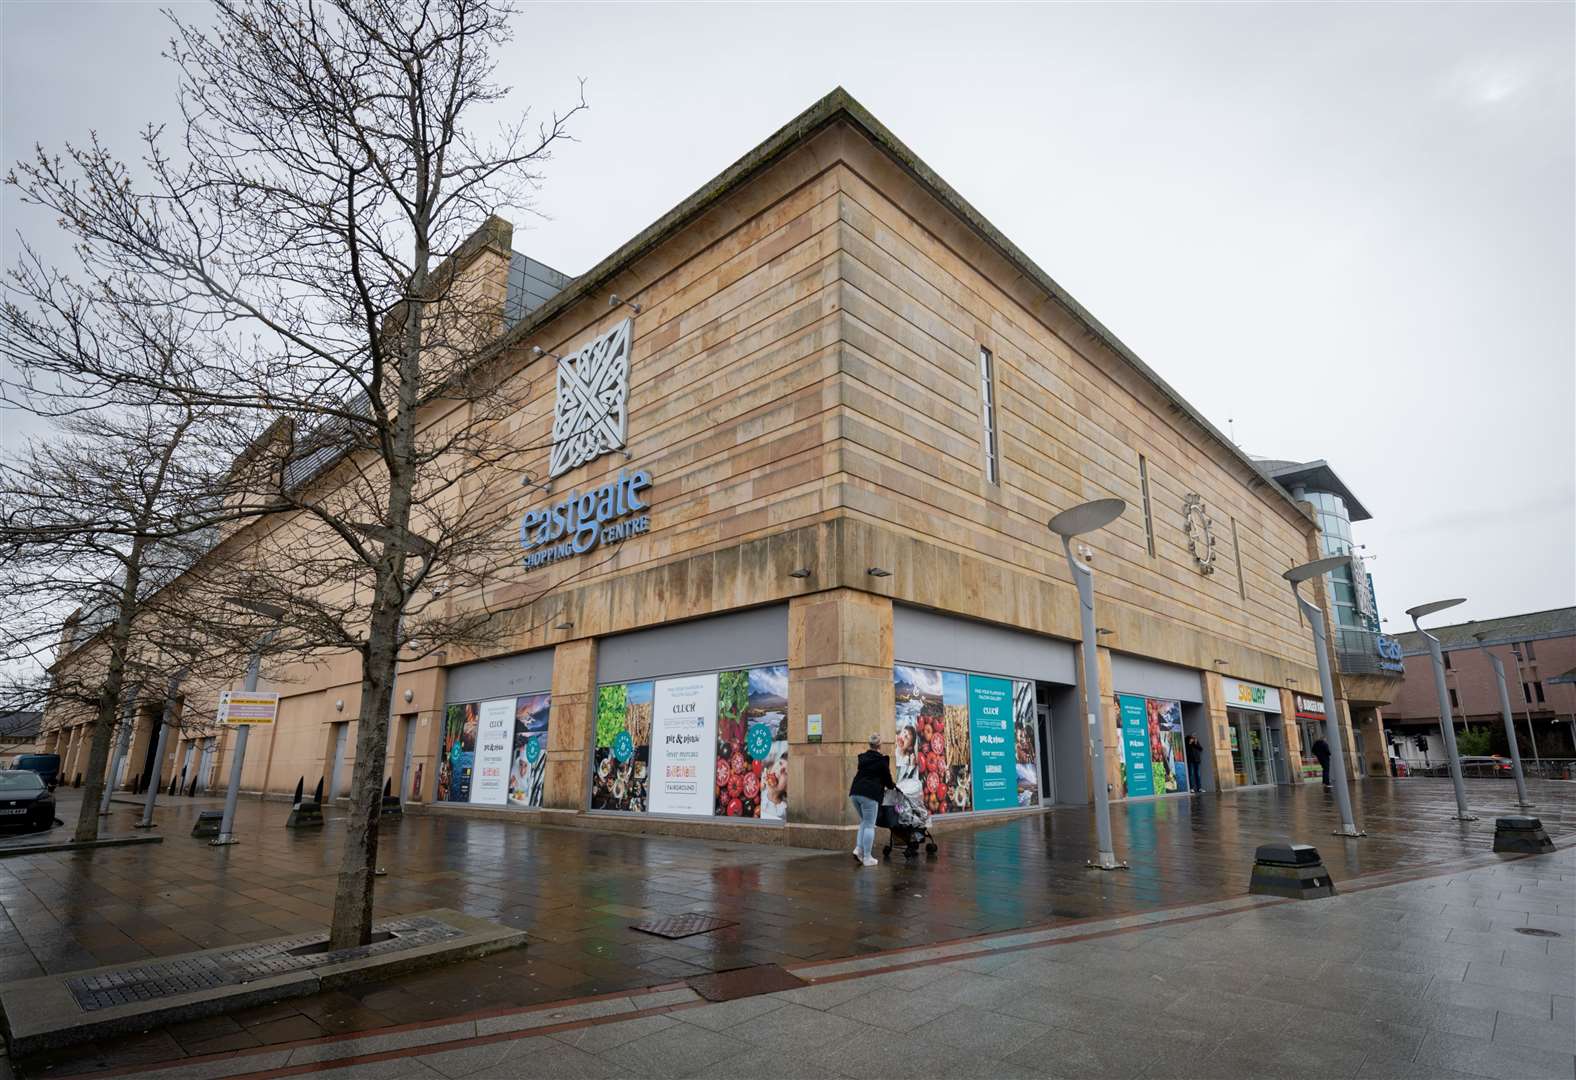 RBS have finalised plans to merge their Harbour Road and Eastgate outlets into one 'flagship' superbranch to be located in currently empty units facing Falcon Square.